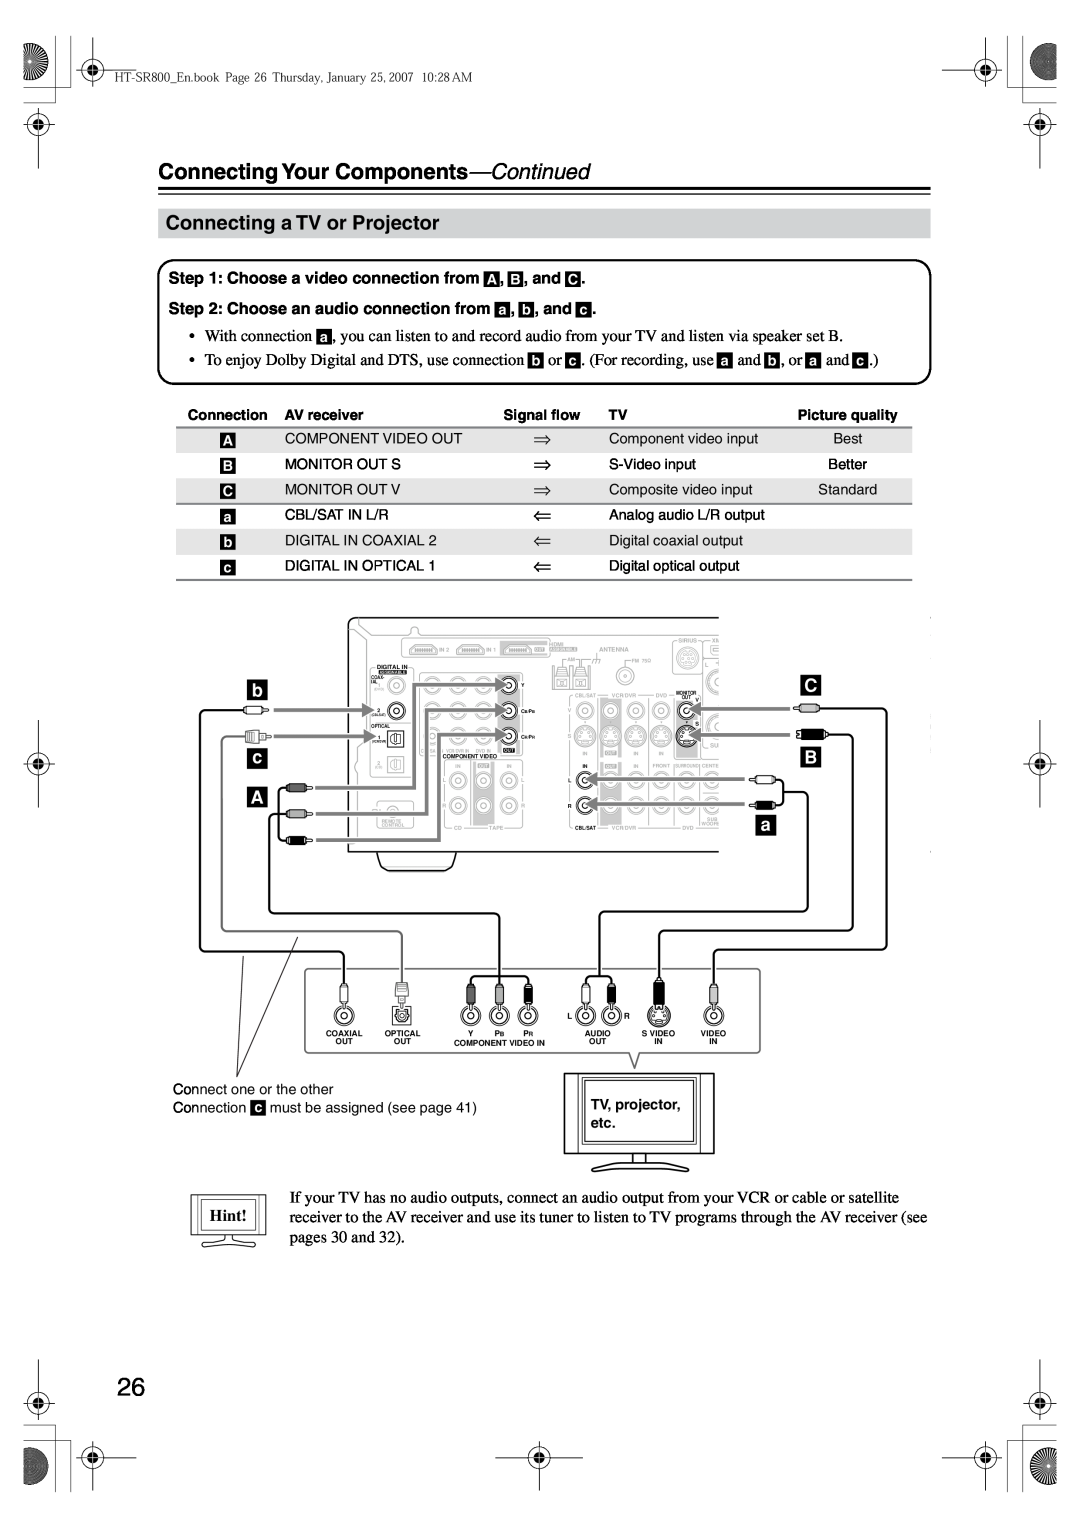 Onkyo HT-SR800 instruction manual Connecting a TV or Projector, Connecting Your Components-Continued, Hint 